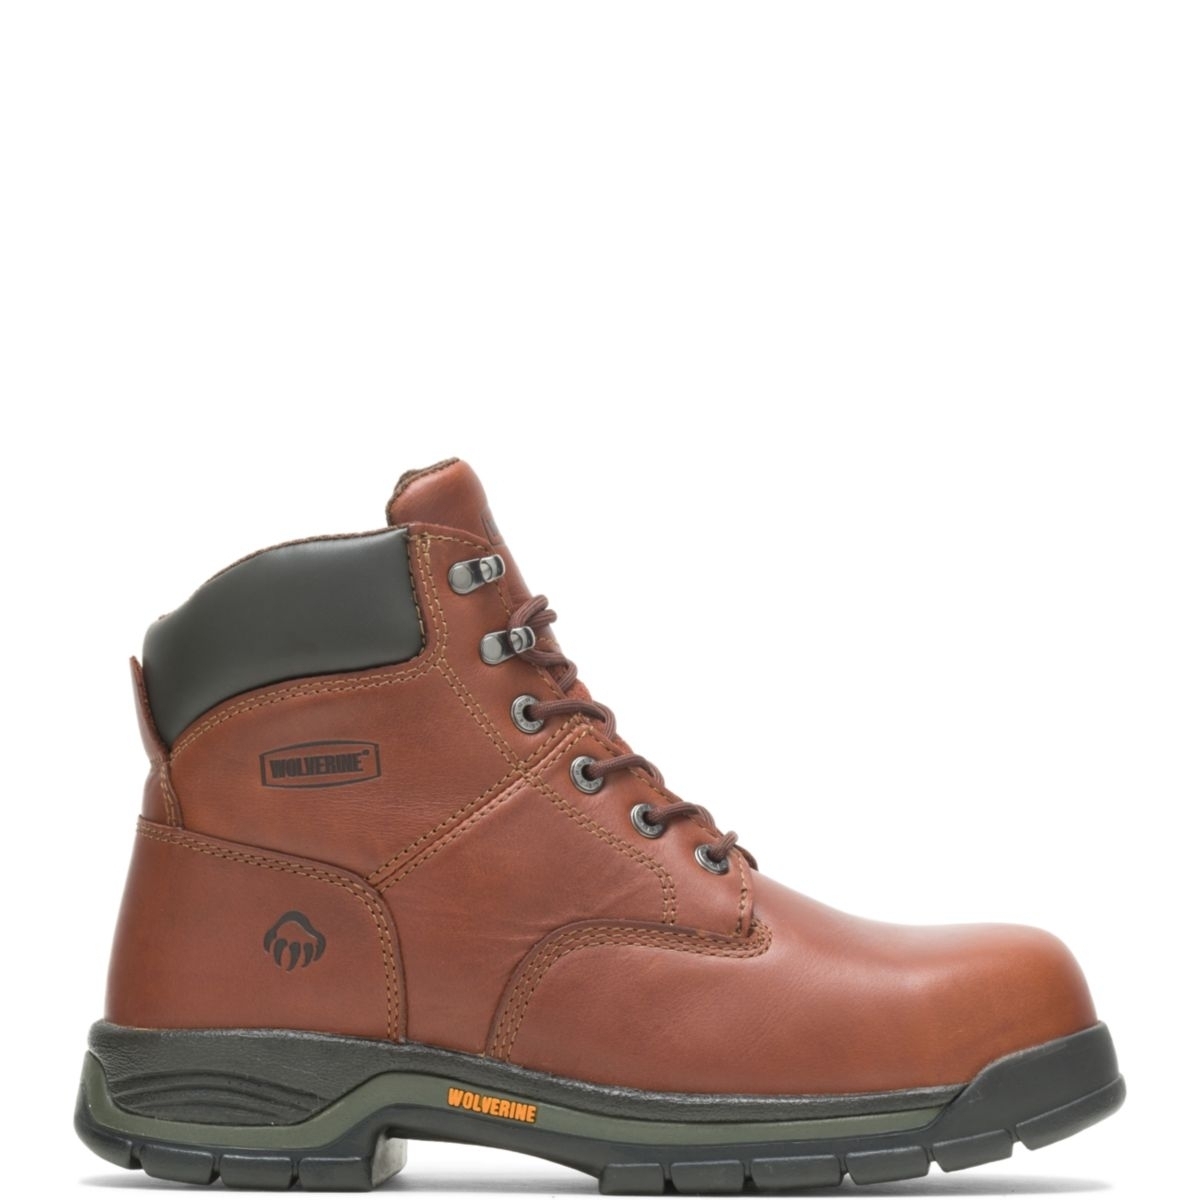 WOLVERINE Men's Harrison 6 Lace-Up Steel Toe Work Boot Brown - W04904 BROWN LEATHER - BROWN LEATHER, 7.5 X-Wide